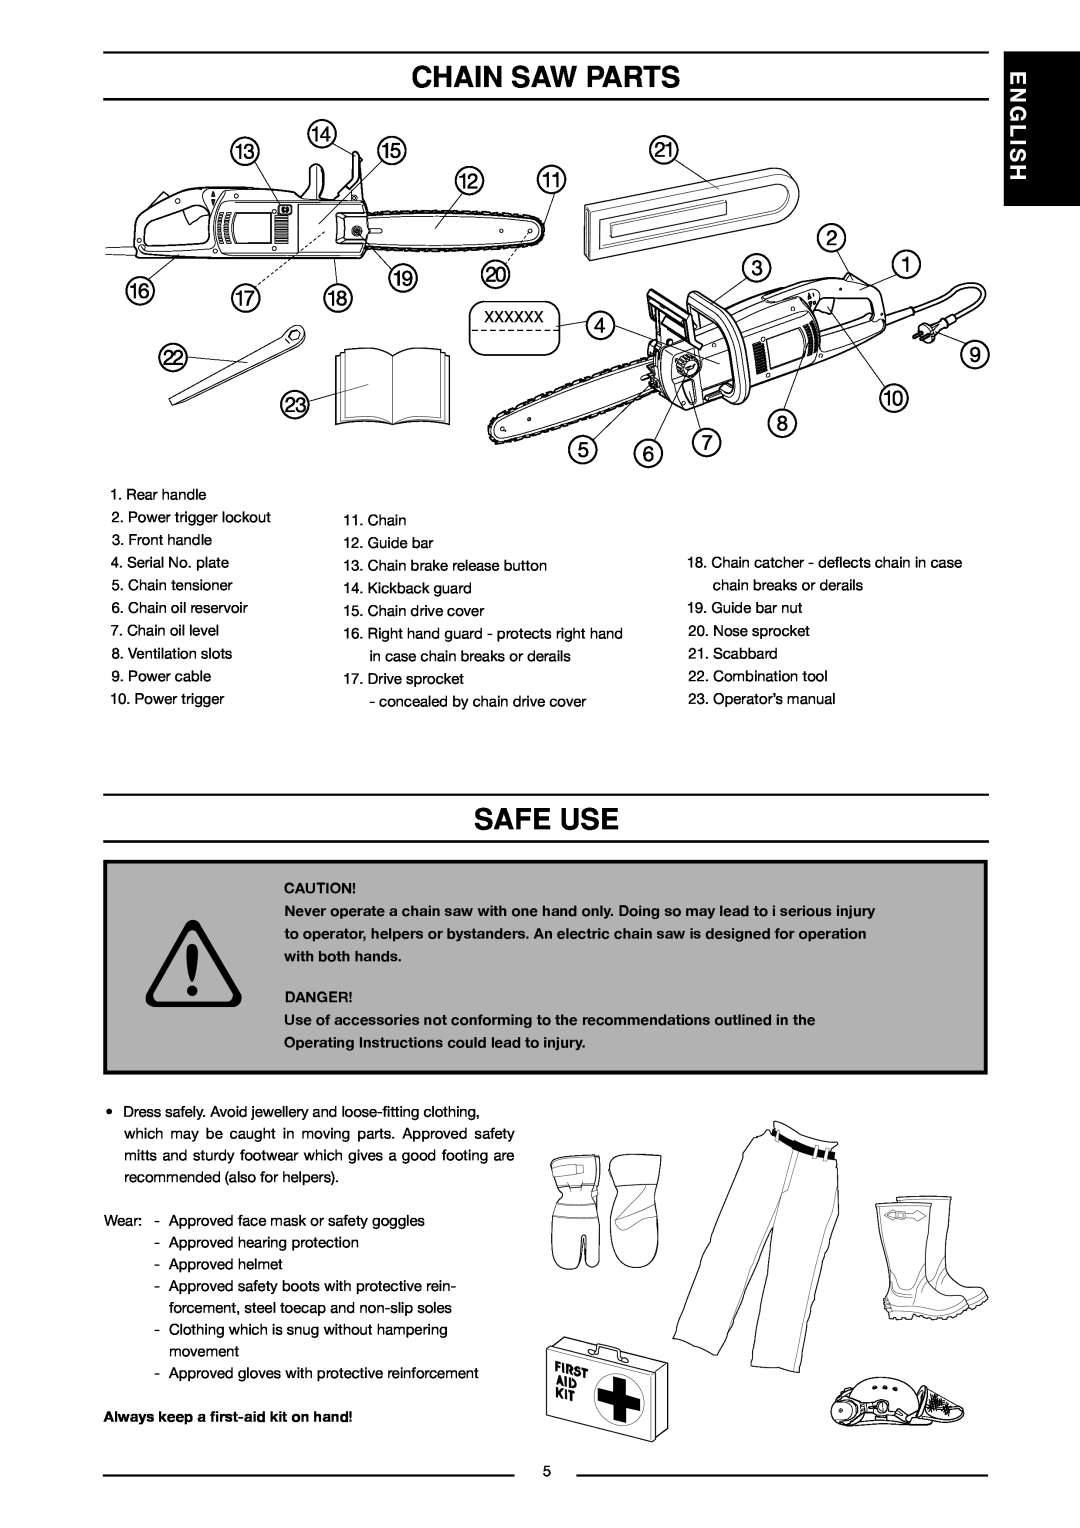 Husqvarna 317 EL, 321 EL manual Chain Saw Parts, Safe Use, English, Danger, Operating Instructions could lead to injury 